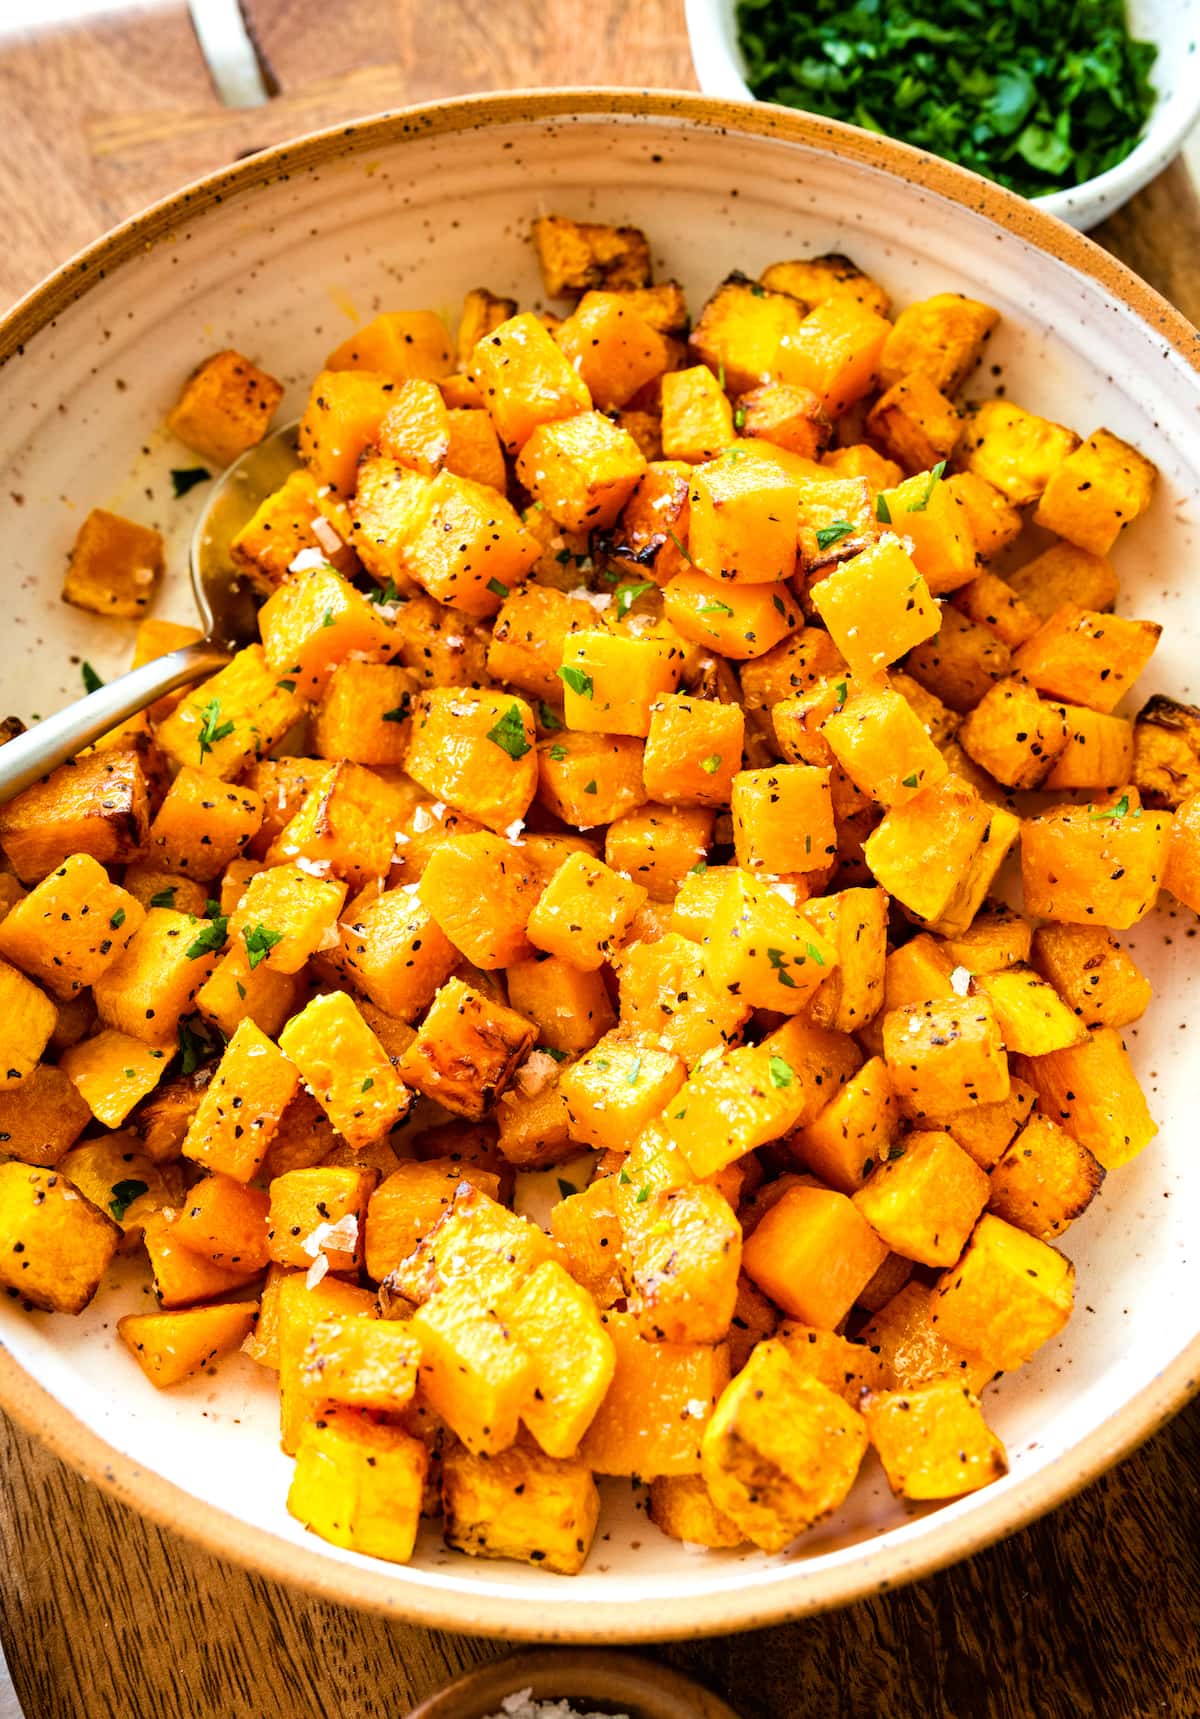 Cubed and seasoned air fried butternut squash on a large plate.